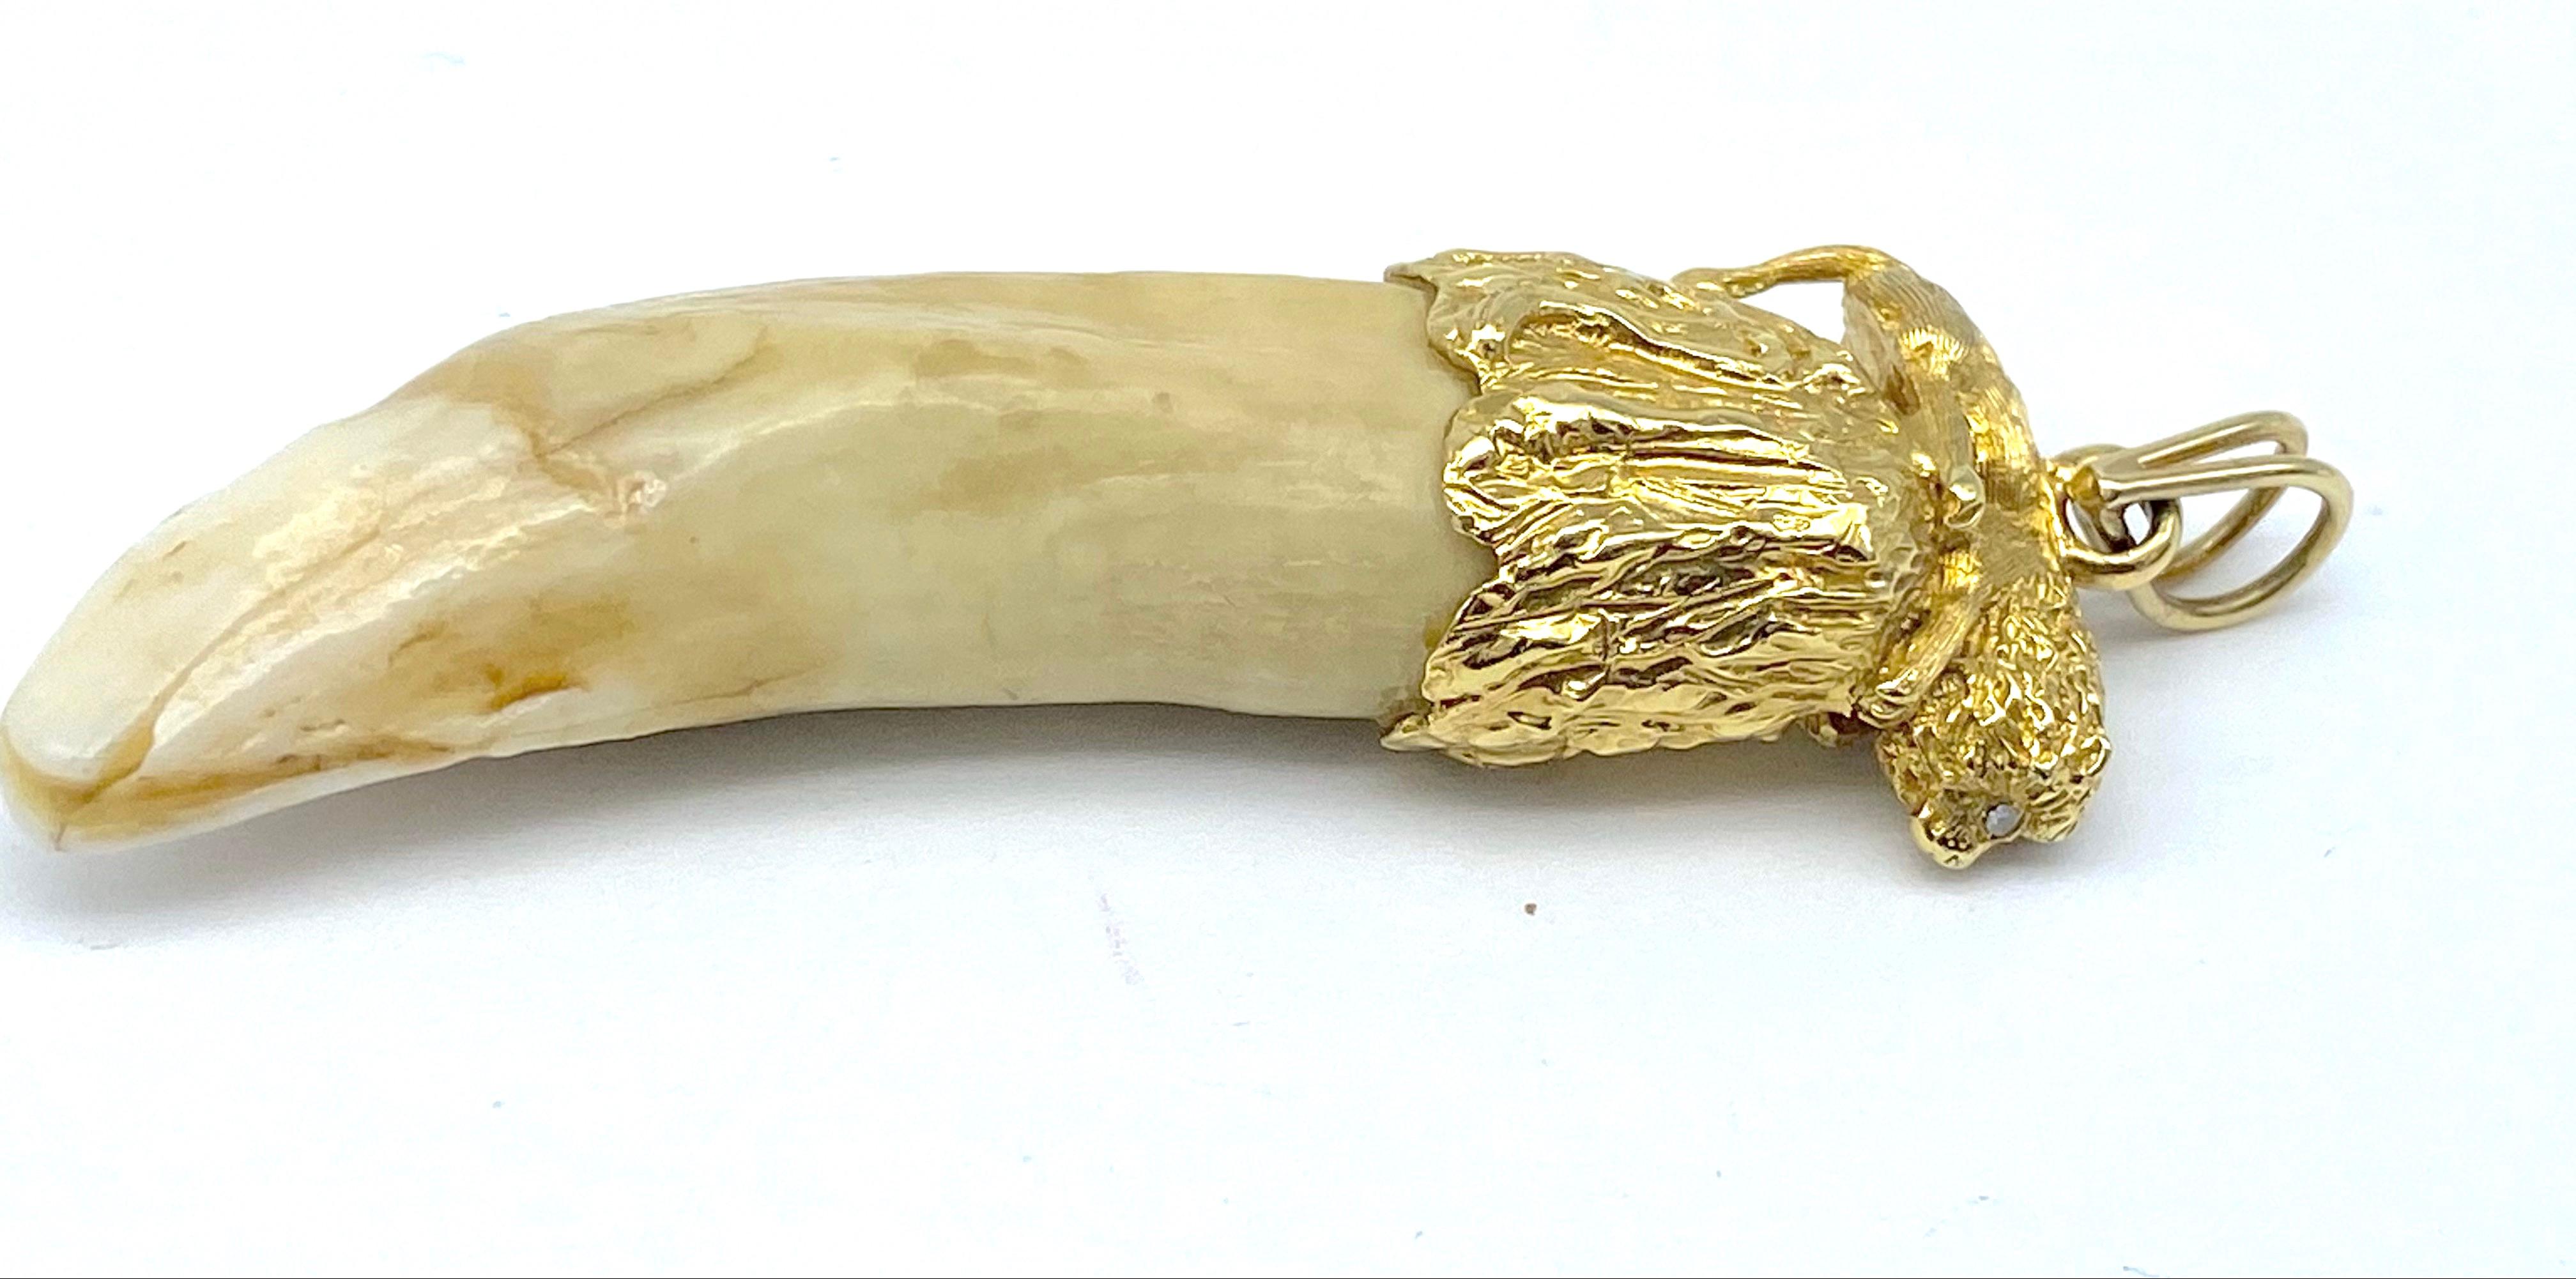 
Custom made gold cap with diamond encompasses this striking Lions Tooth.

Double wide Bail: 1/4 inch additional length
Gold encrusted custom made cap with Lion measures nearly 1 inch in length
Lion is laying down over the cap of the tooth with